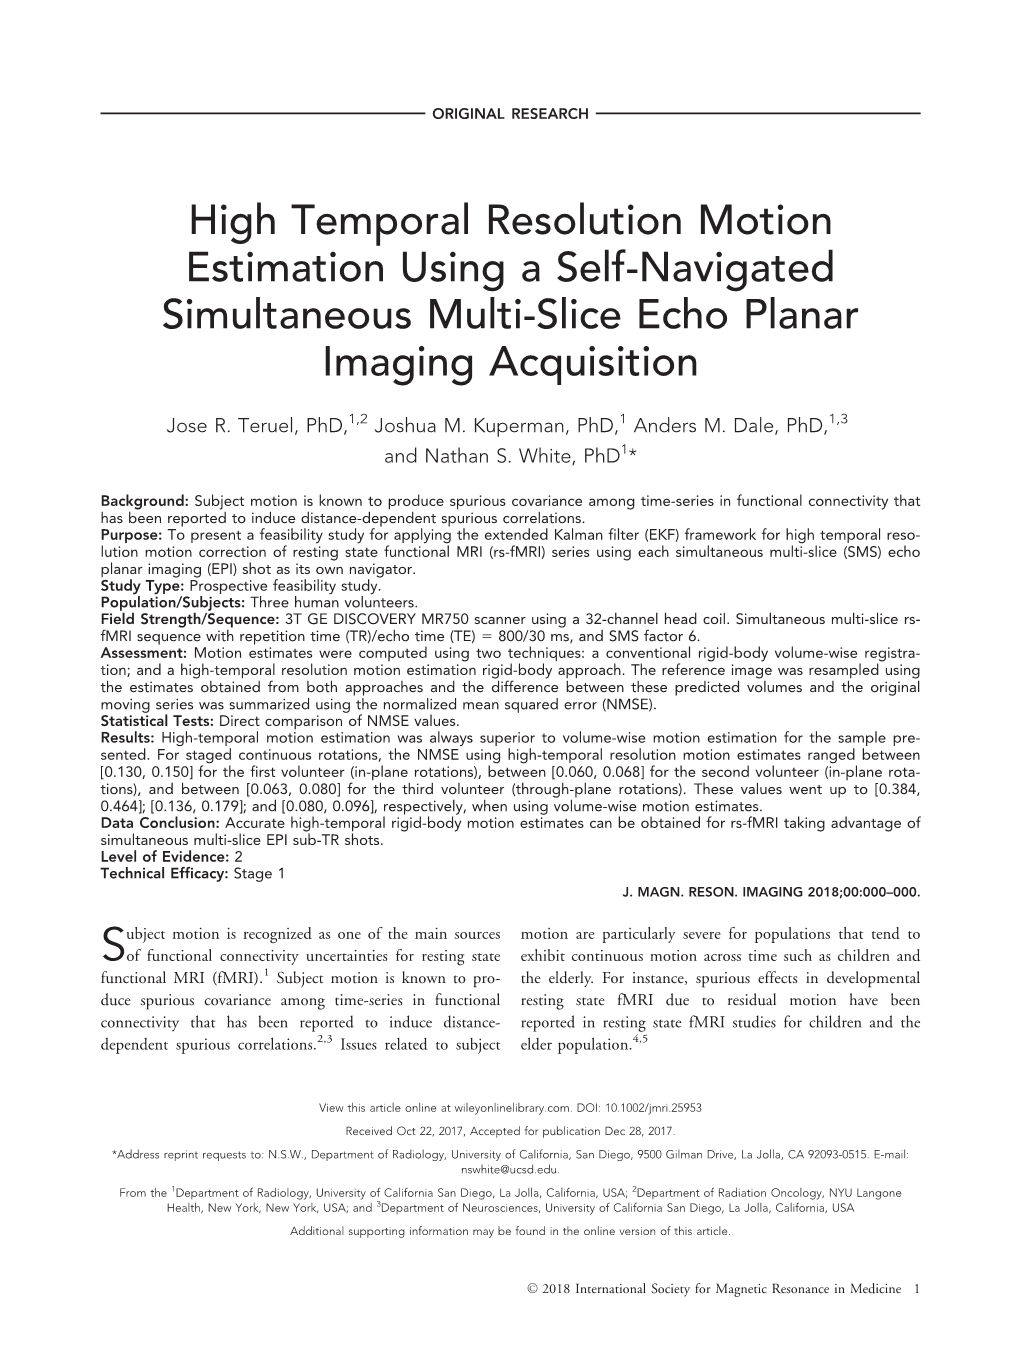 High Temporal Resolution Motion Estimation Using a Self-Navigated Simultaneous Multi-Slice Echo Planar Imaging Acquisition